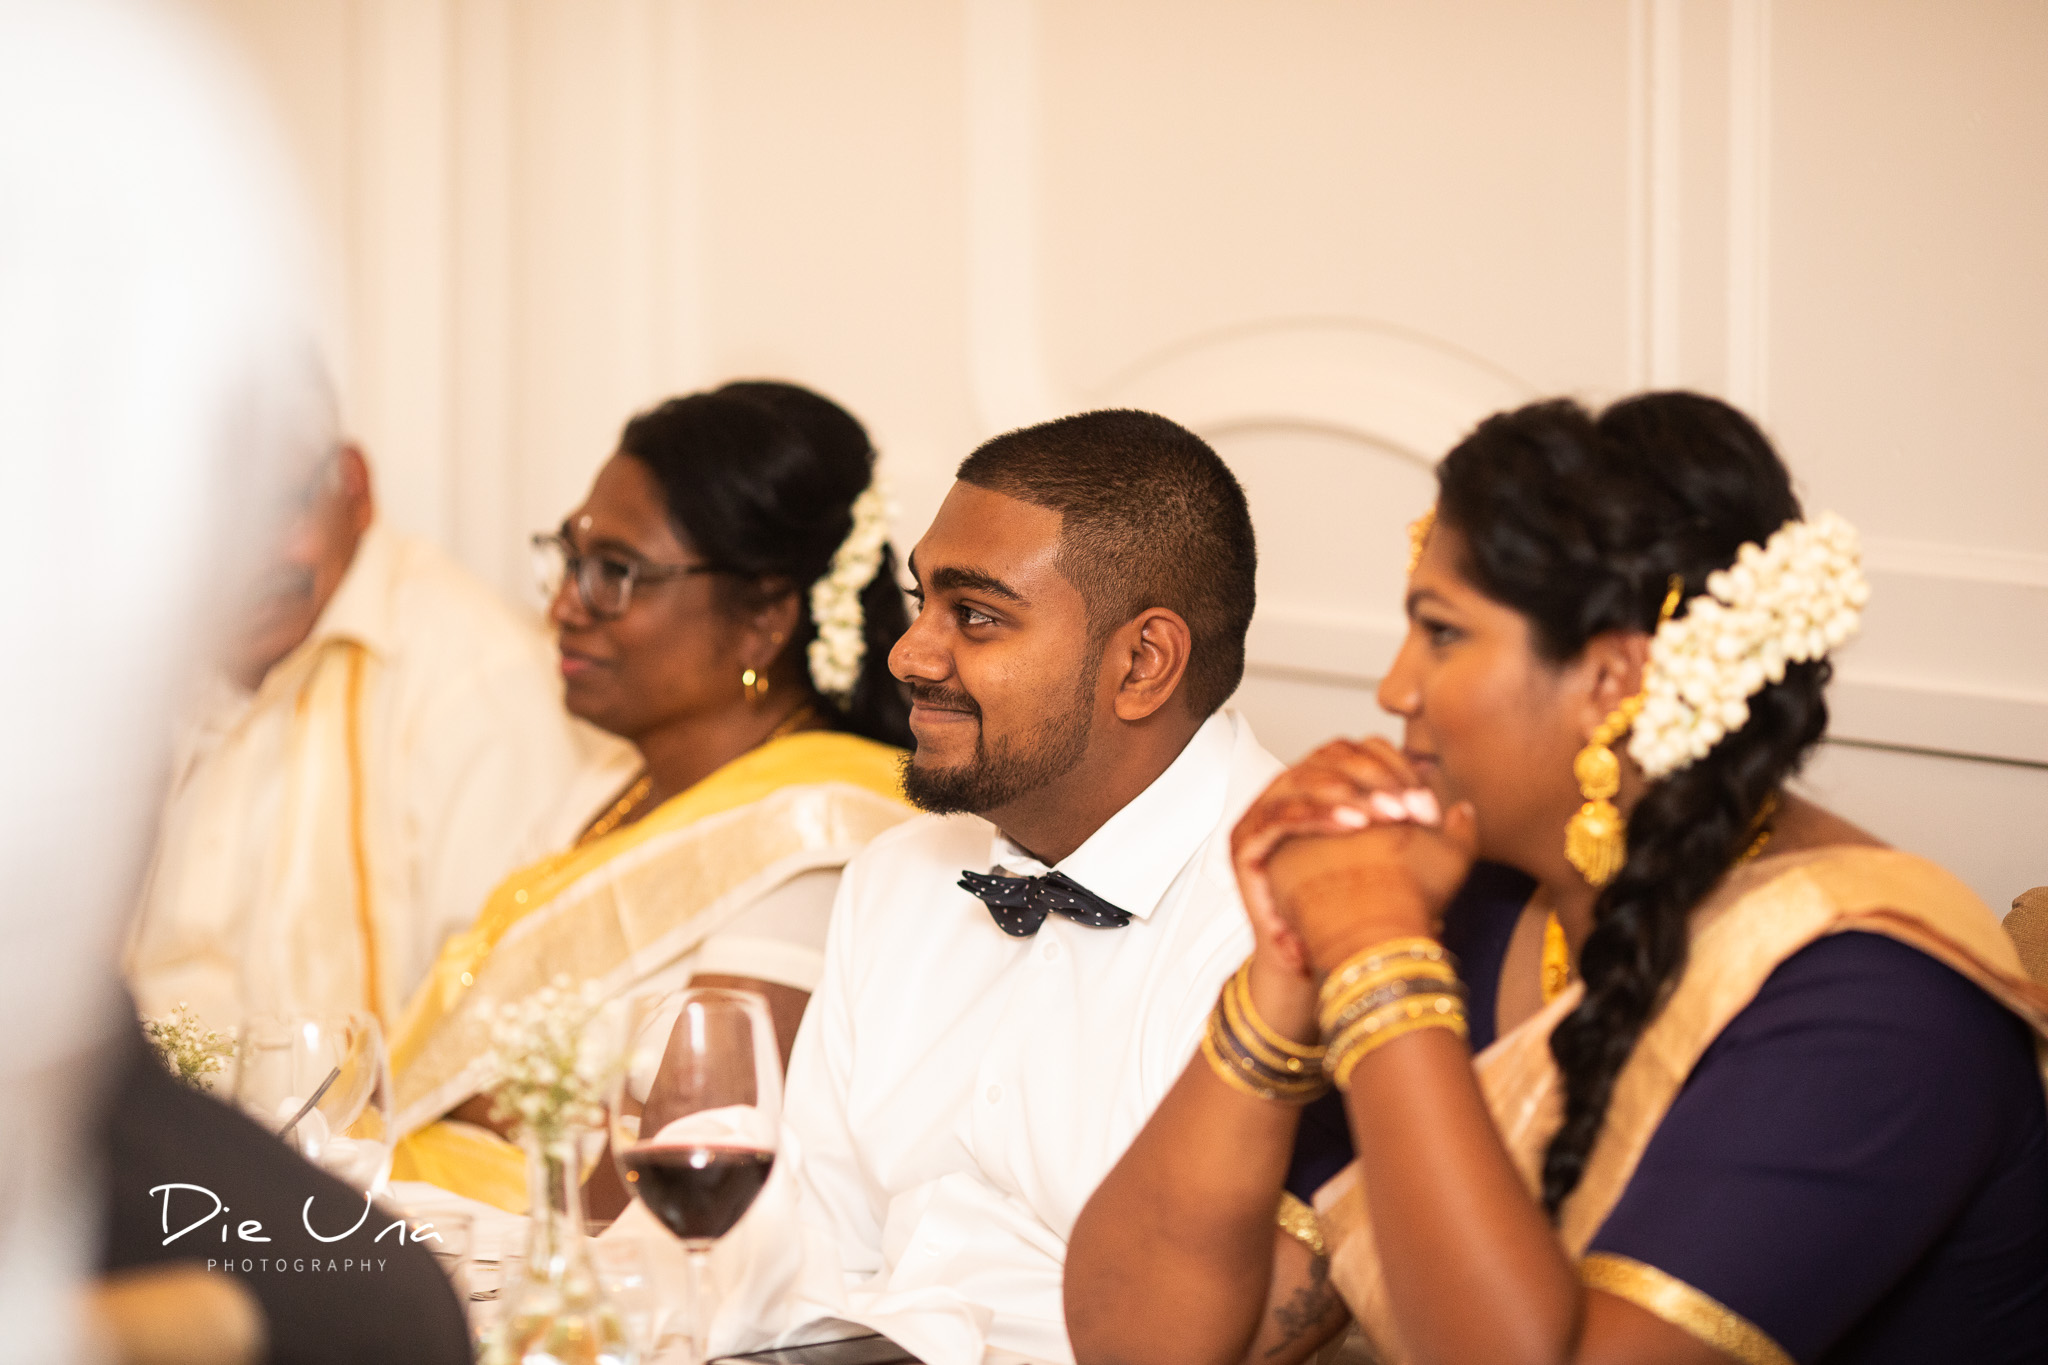 happy guests during speeches at wedding.jpg